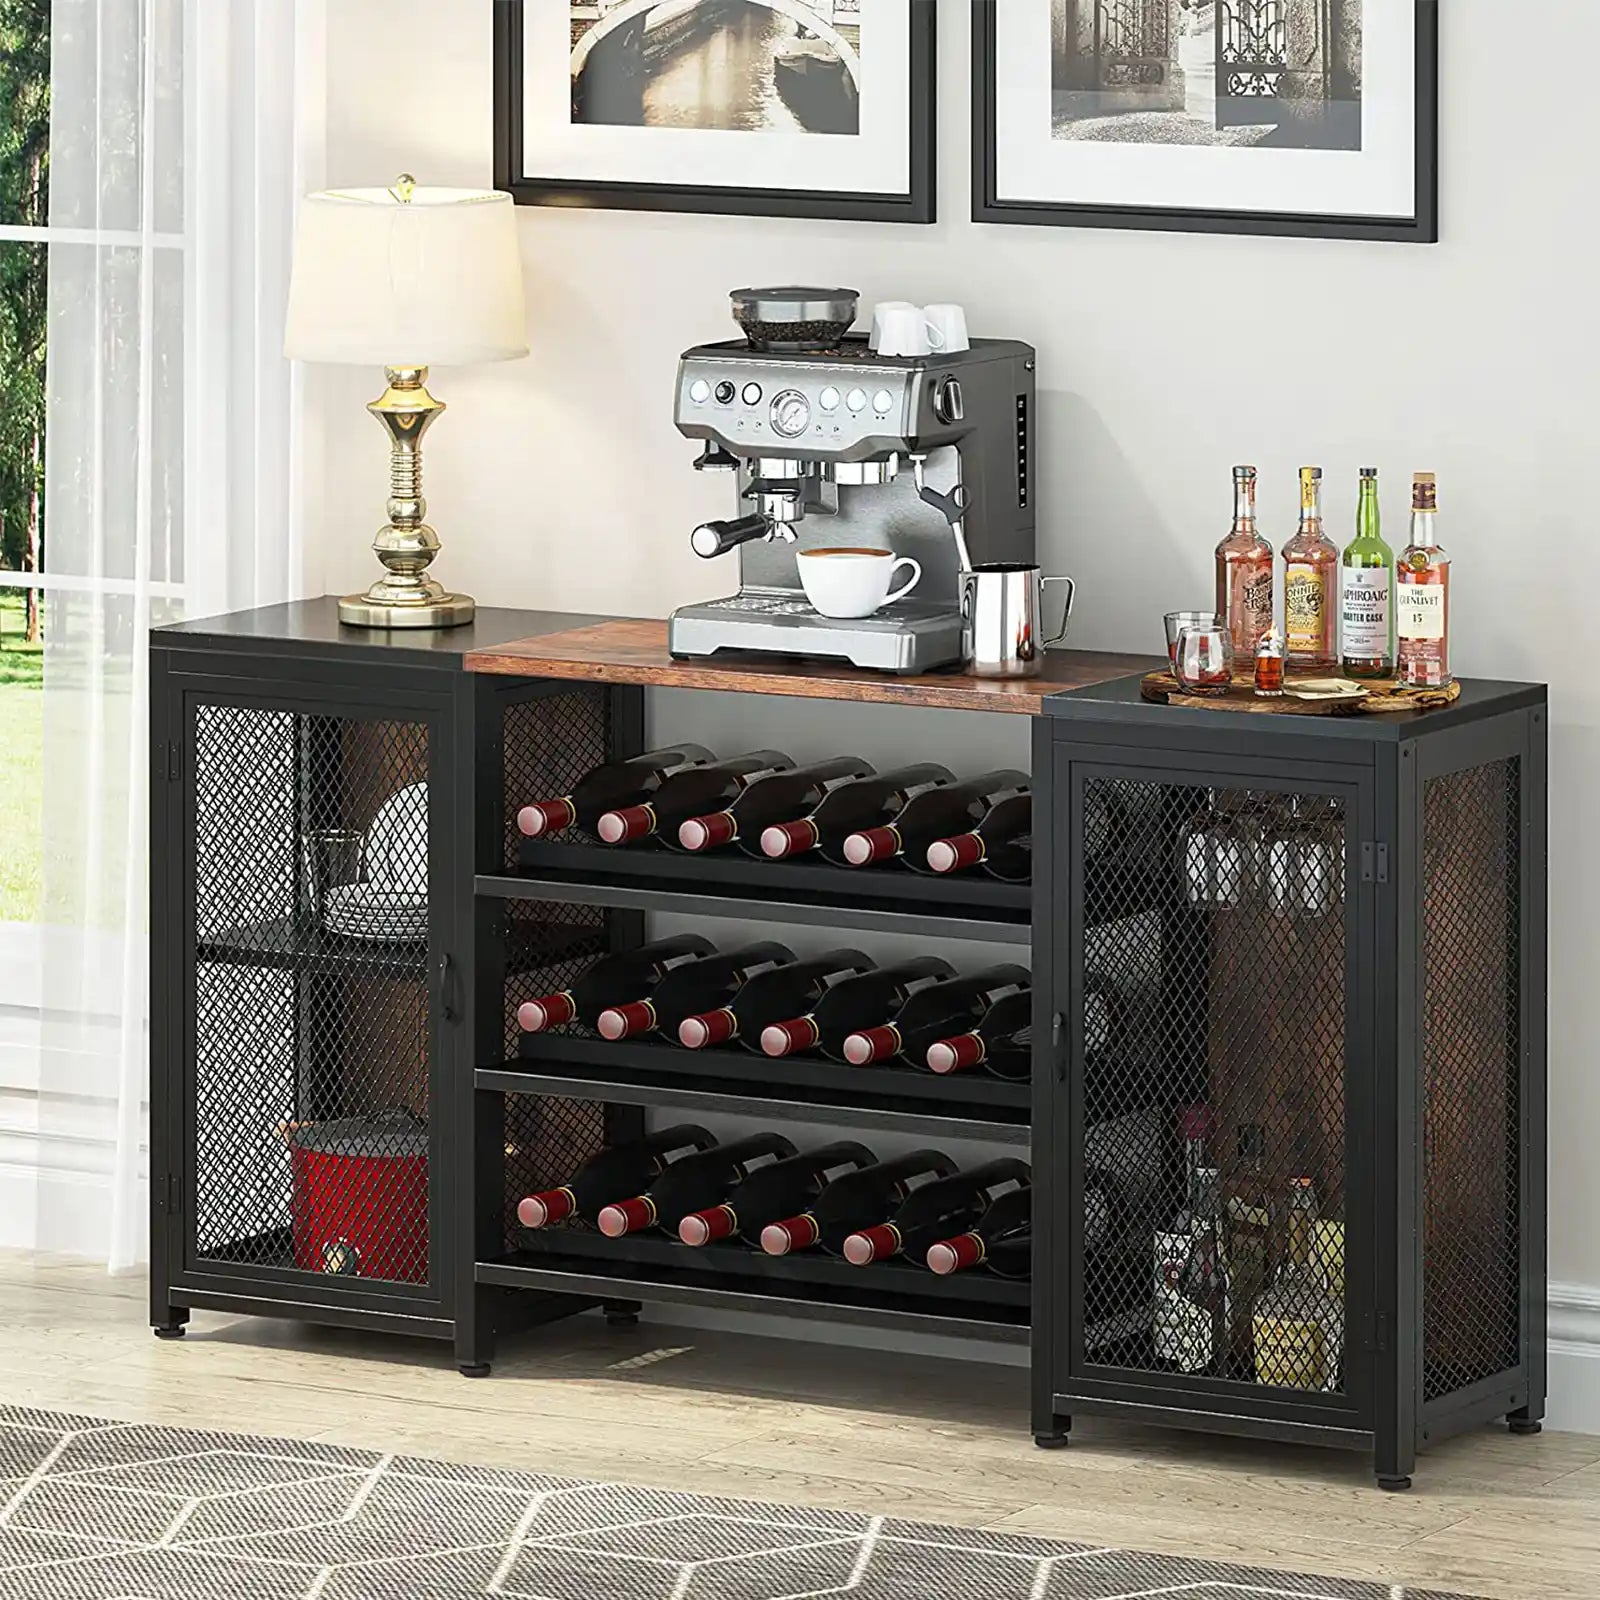 Rustic Wood Bar Cabinet For Liquor And Gl